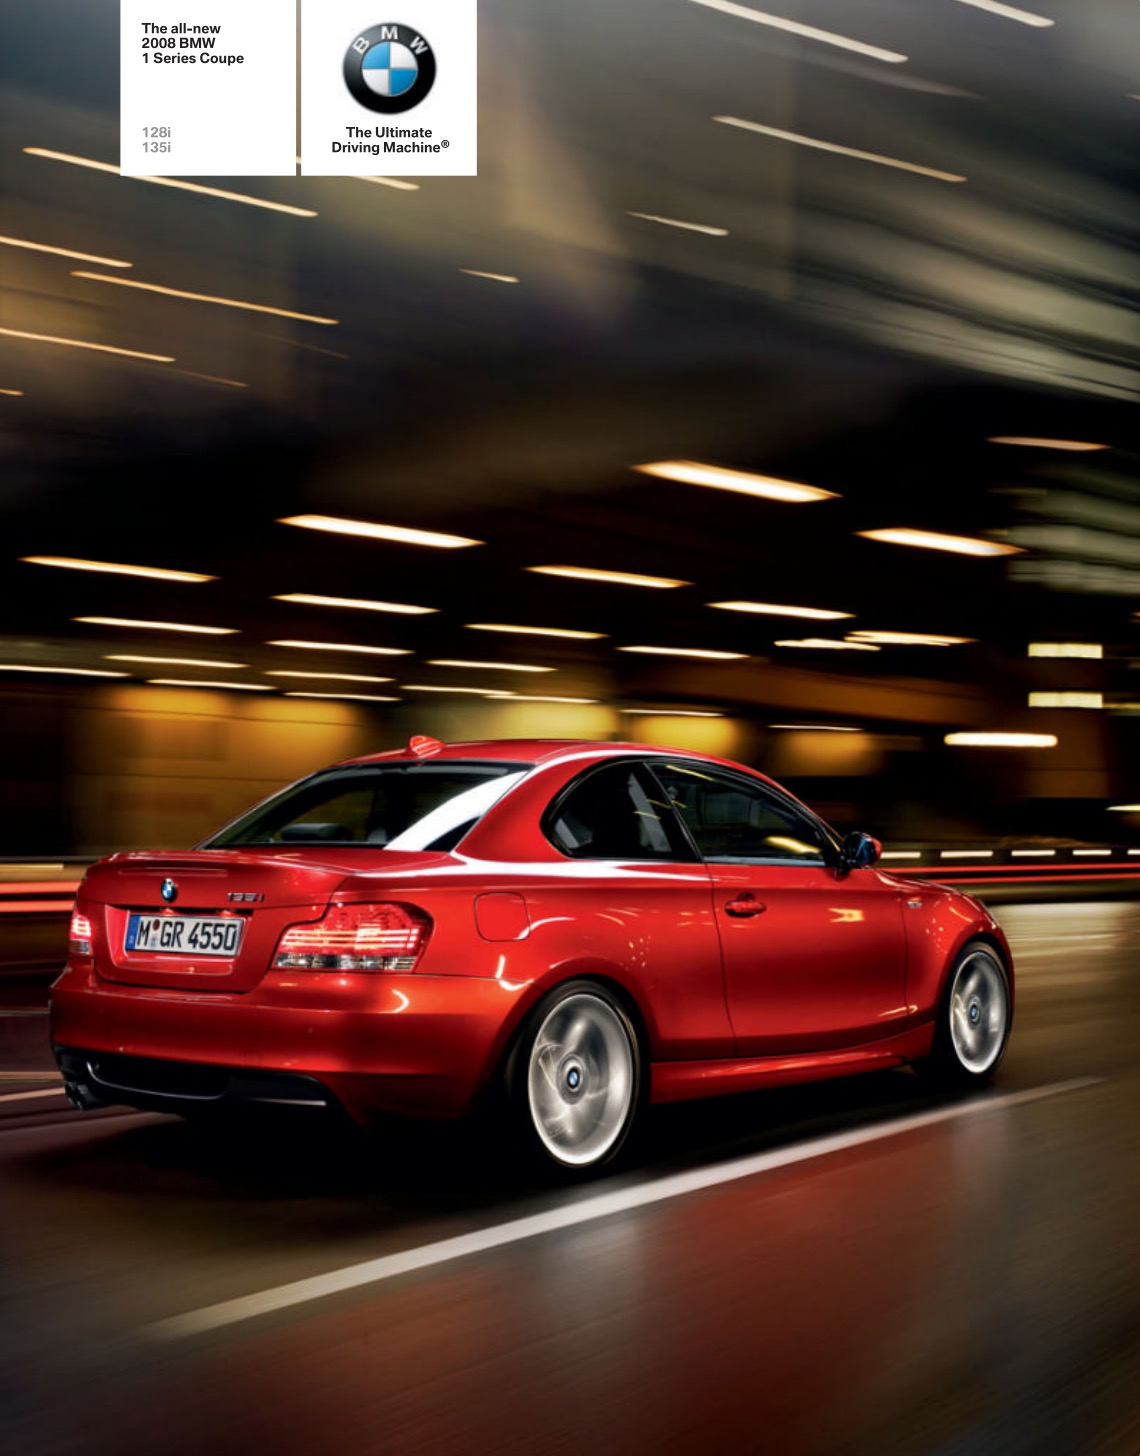 2008 BMW 1-Series Coupe Brochure